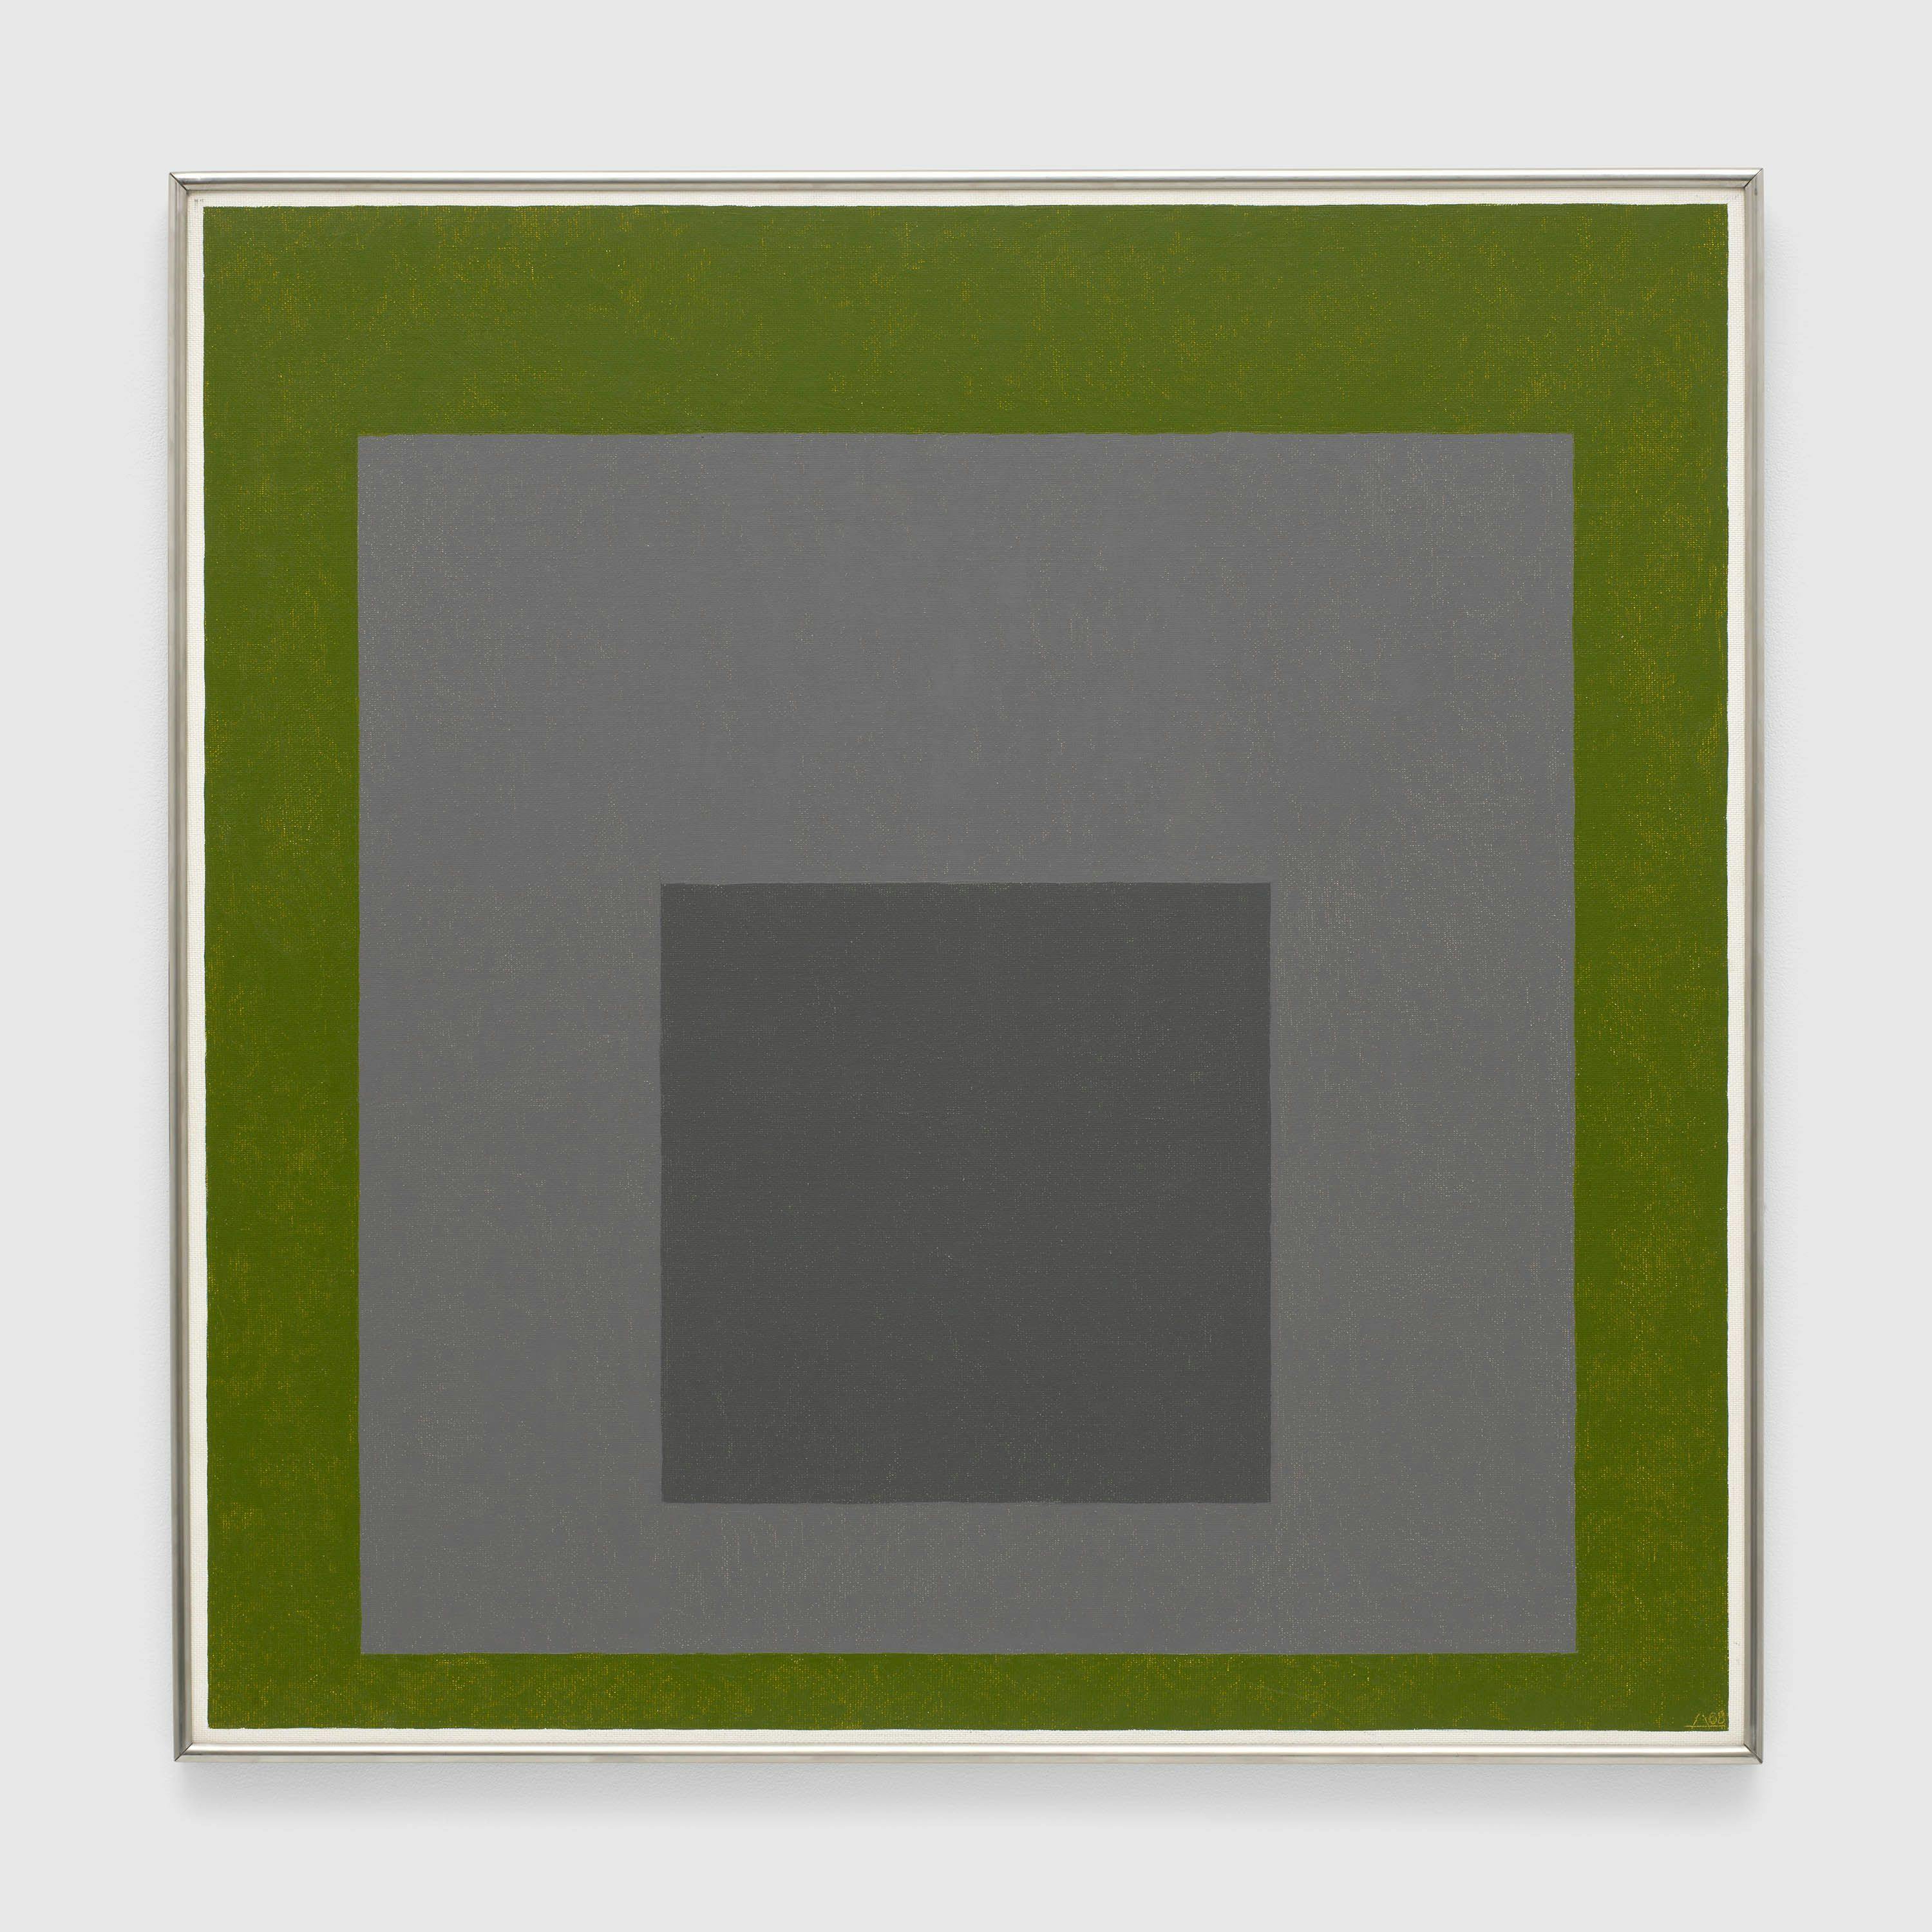 A painting by Josef Albers, titled Study for Homage to the Square, dated 1968.